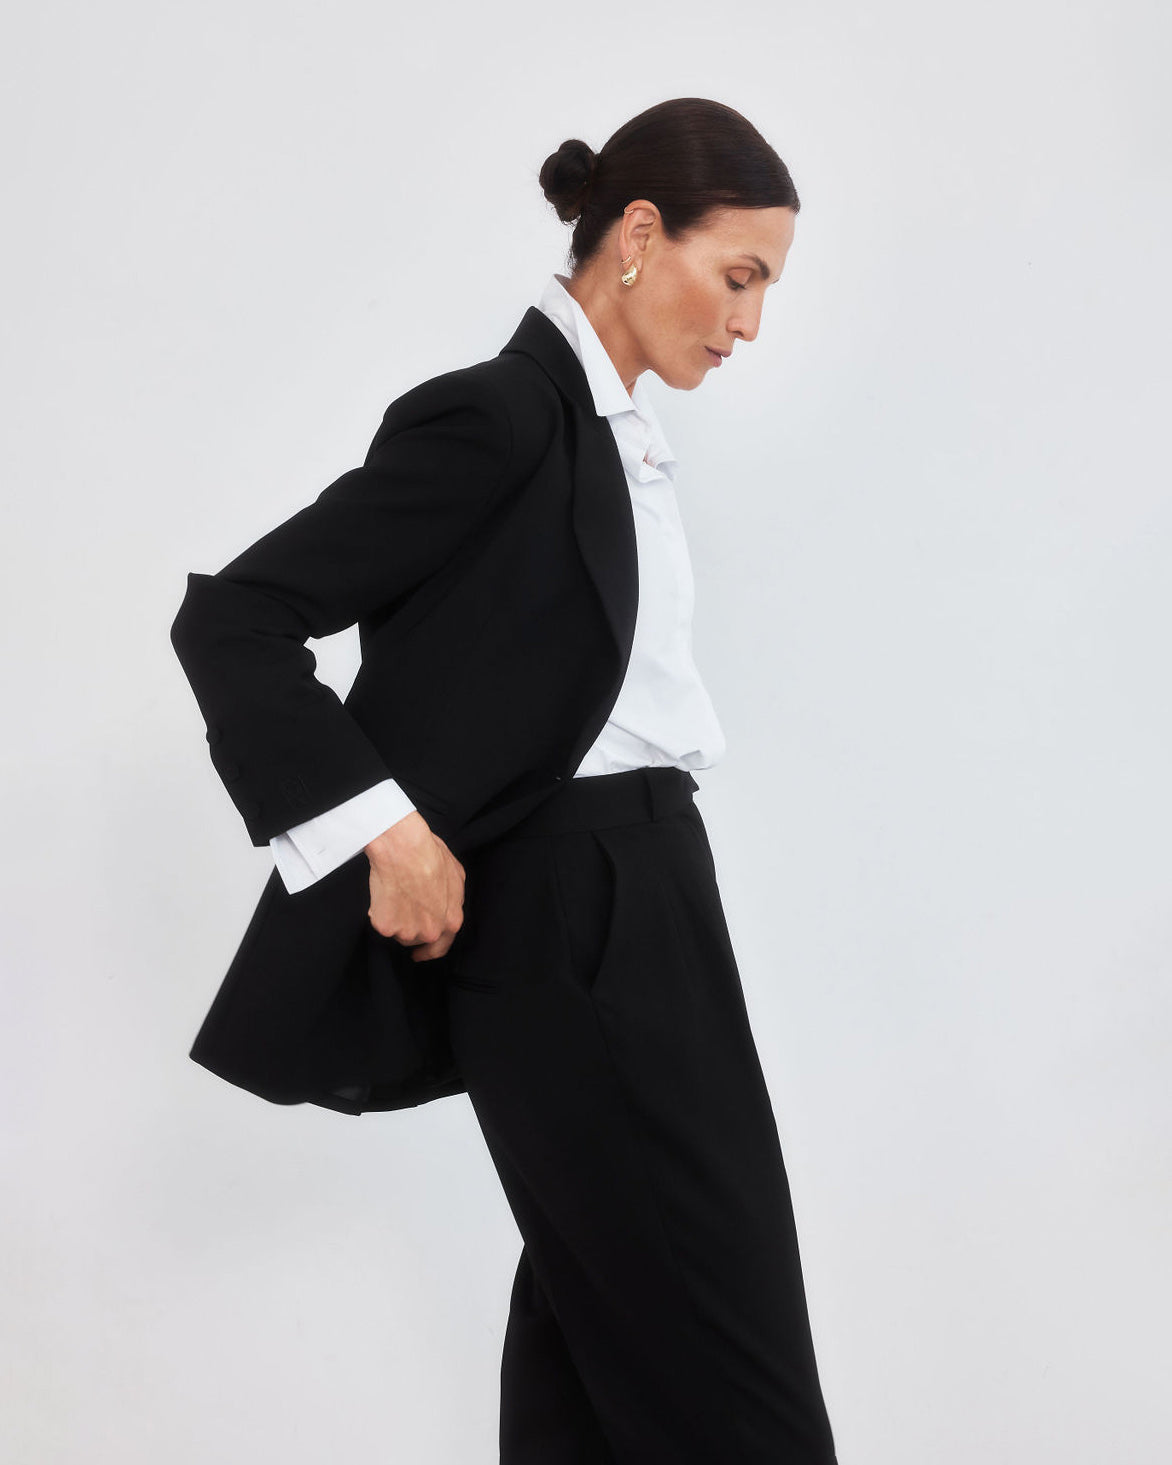 Middle aged woman with pulled back hair in a bun looking down to the right hand side, wearing a minimalist classic outfit of a tailored black blazer, crisp white shirt and high waisted black trousers